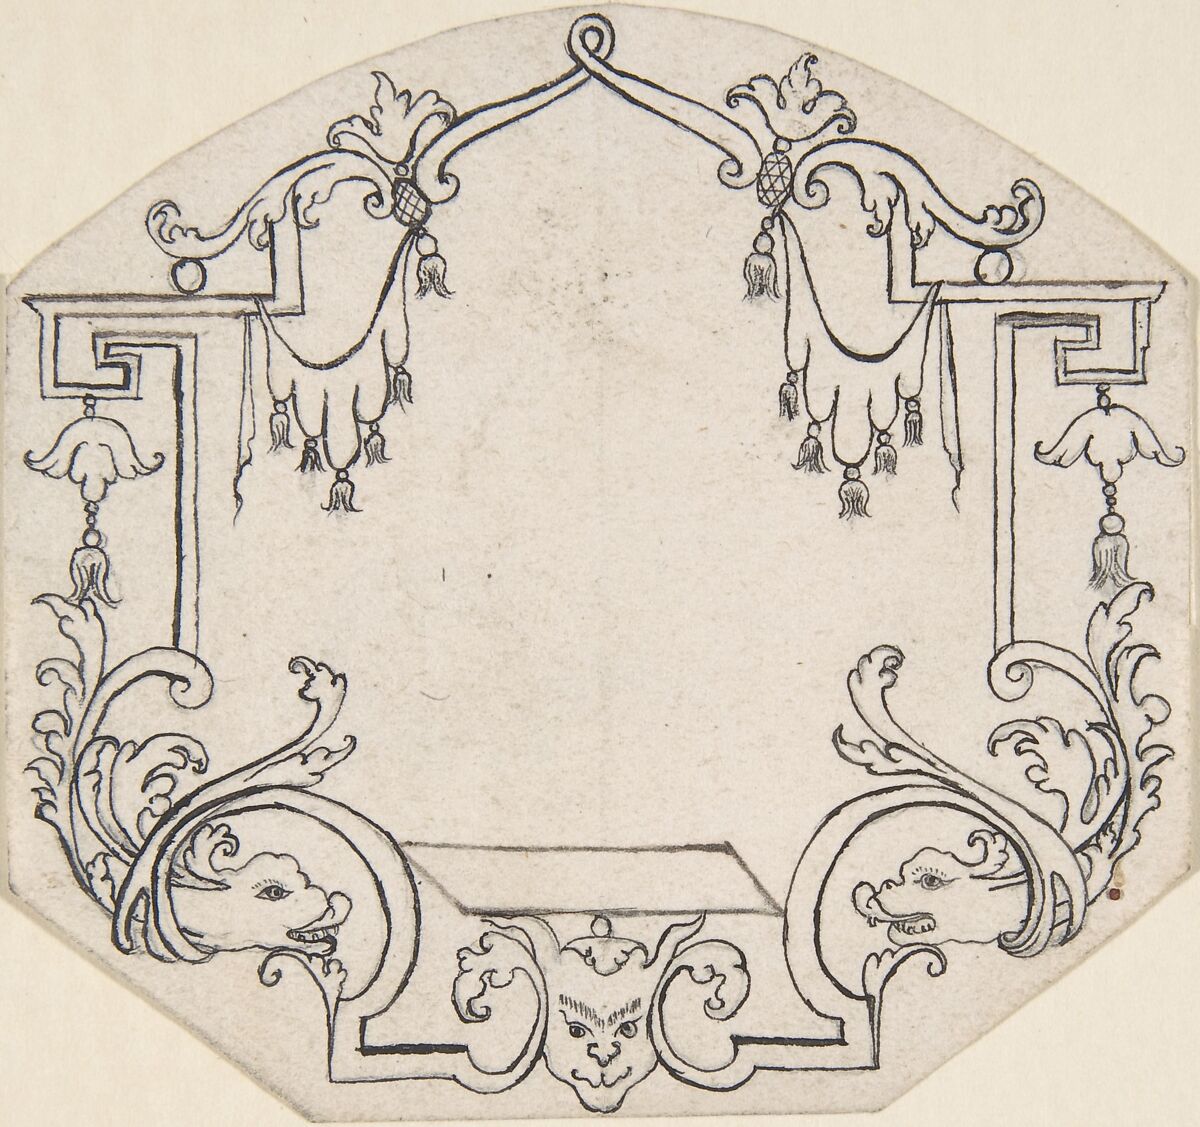 Arabesque Cartouche, Anonymous, French, 18th century, Pen and black ink, graphite. 